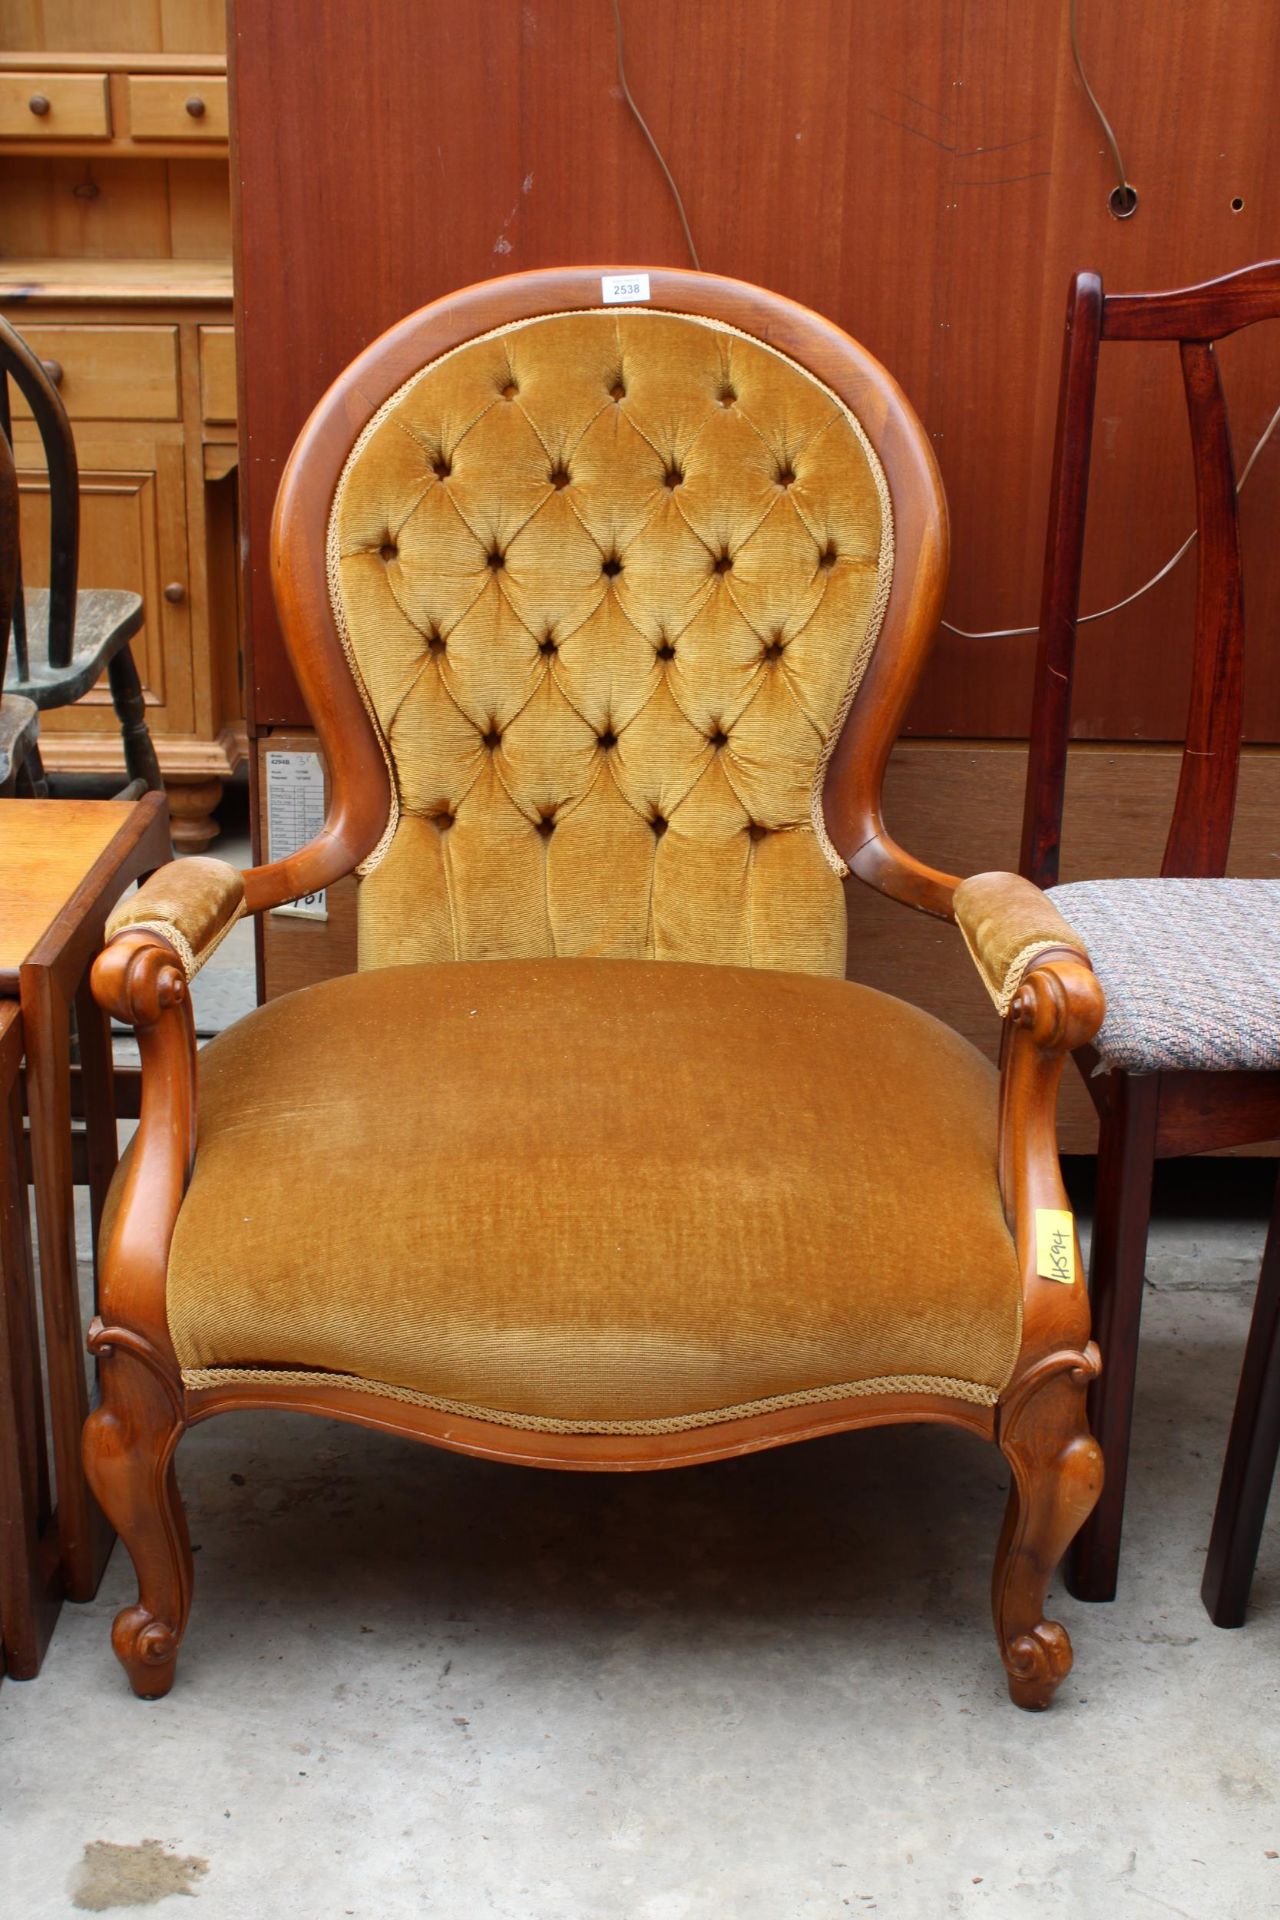 A VICTORIAN STYLE BUTTON SPOON BACK LOUNGE CHAIR WITH SWEPT OPEN ARMS - Image 2 of 3